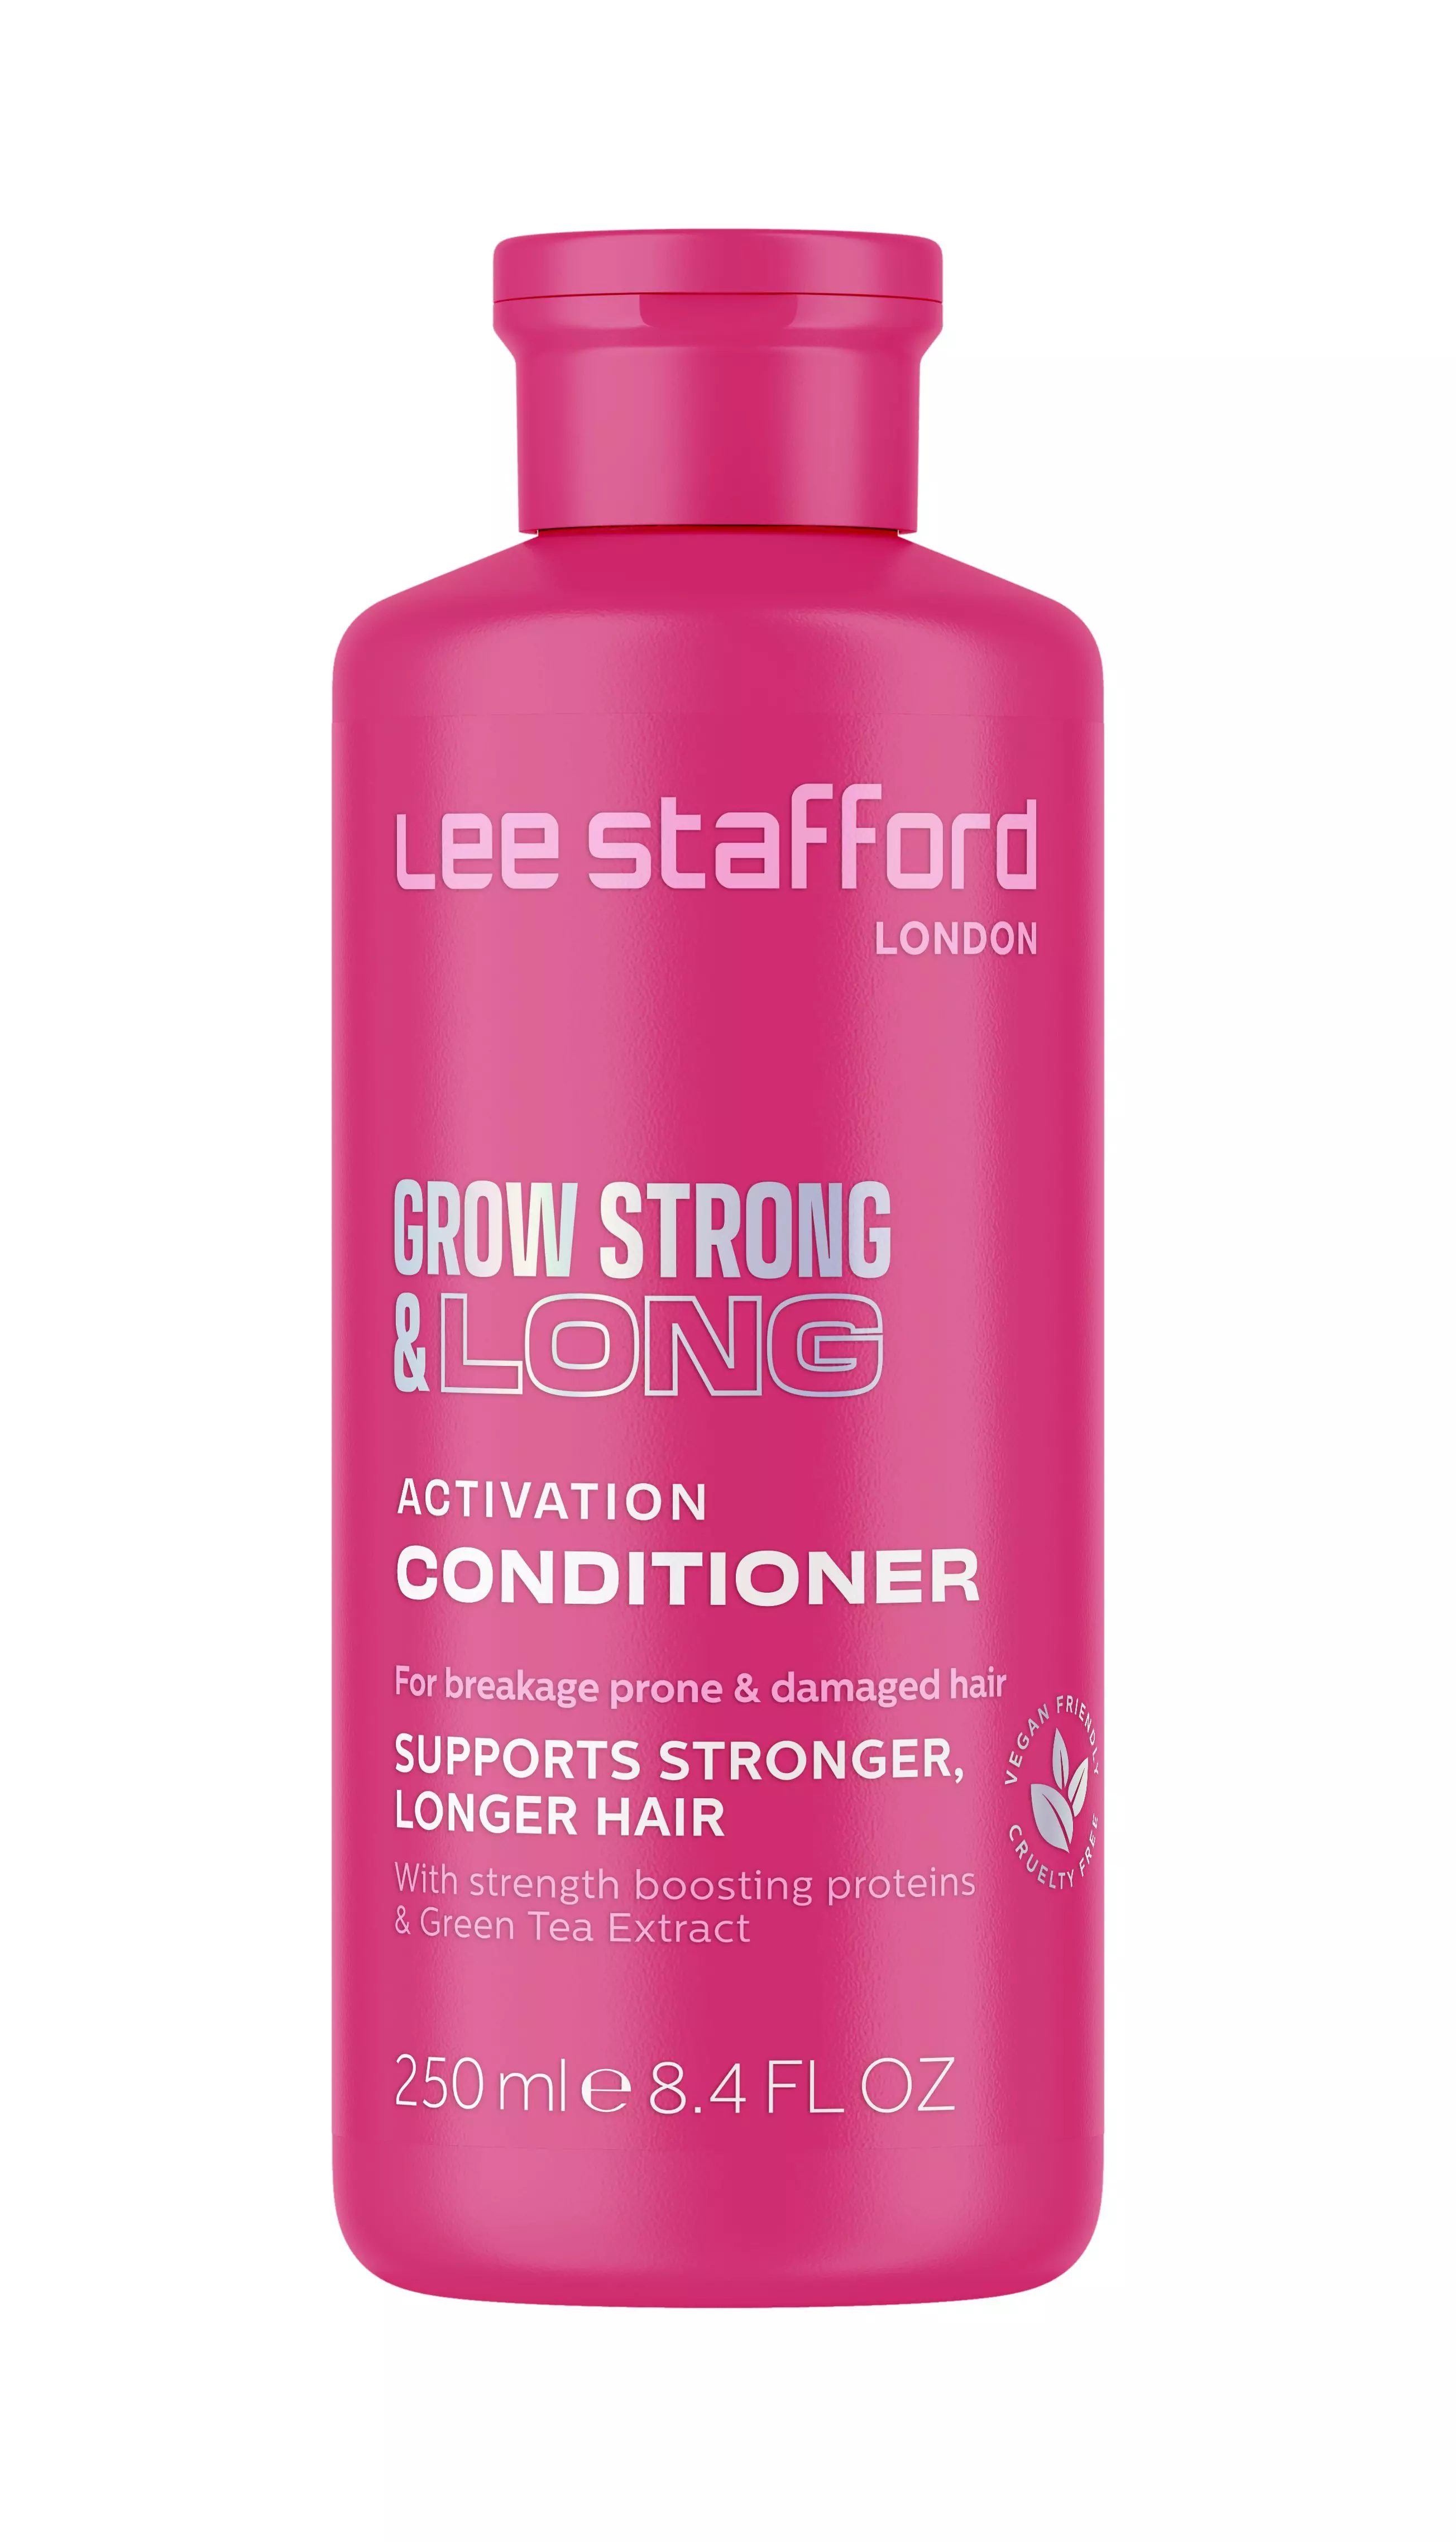 Lee Stafford Grow Stronglong Activation Conditioner